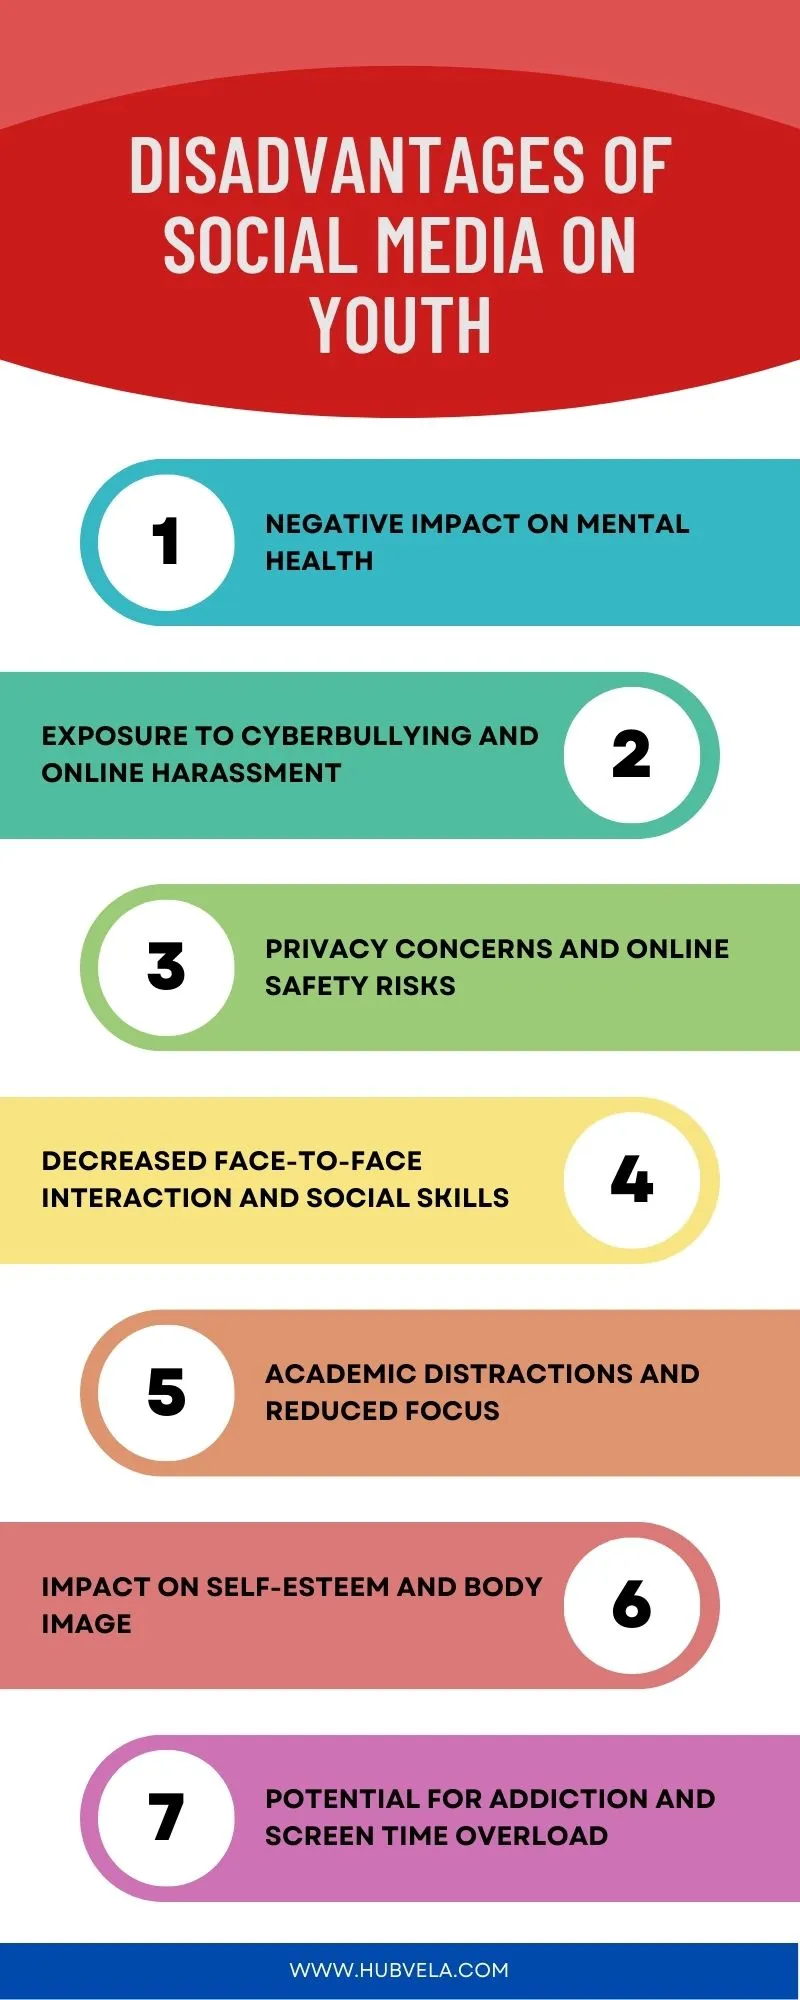 Disadvantages of Social Media on Youth infographic